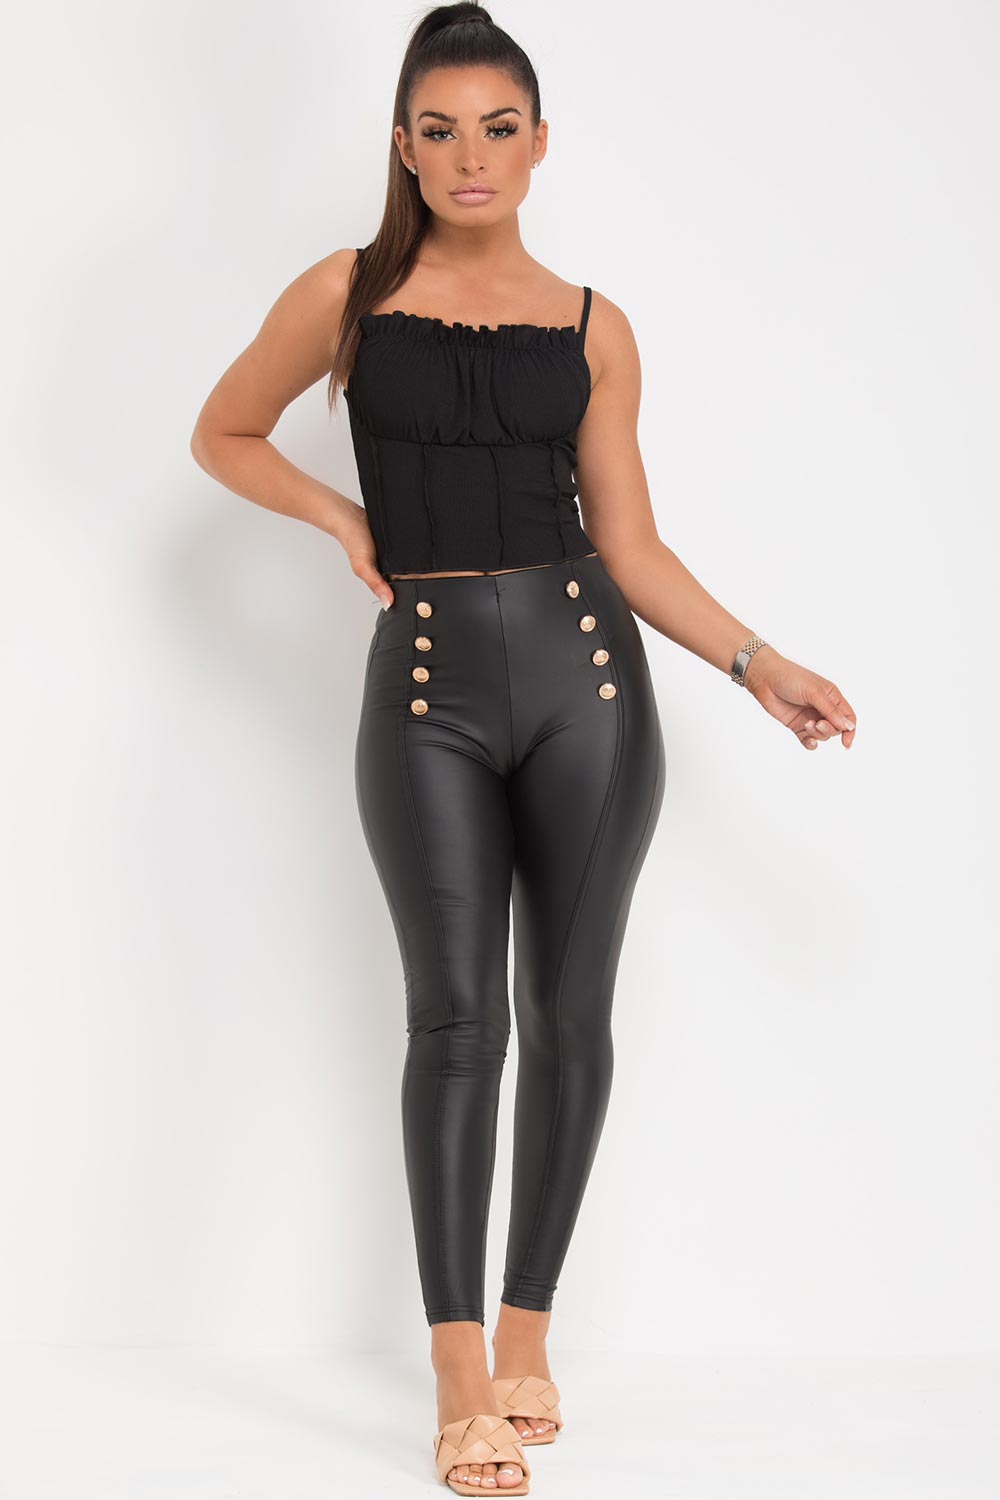 black pu leggings with gold buttons high waisted 